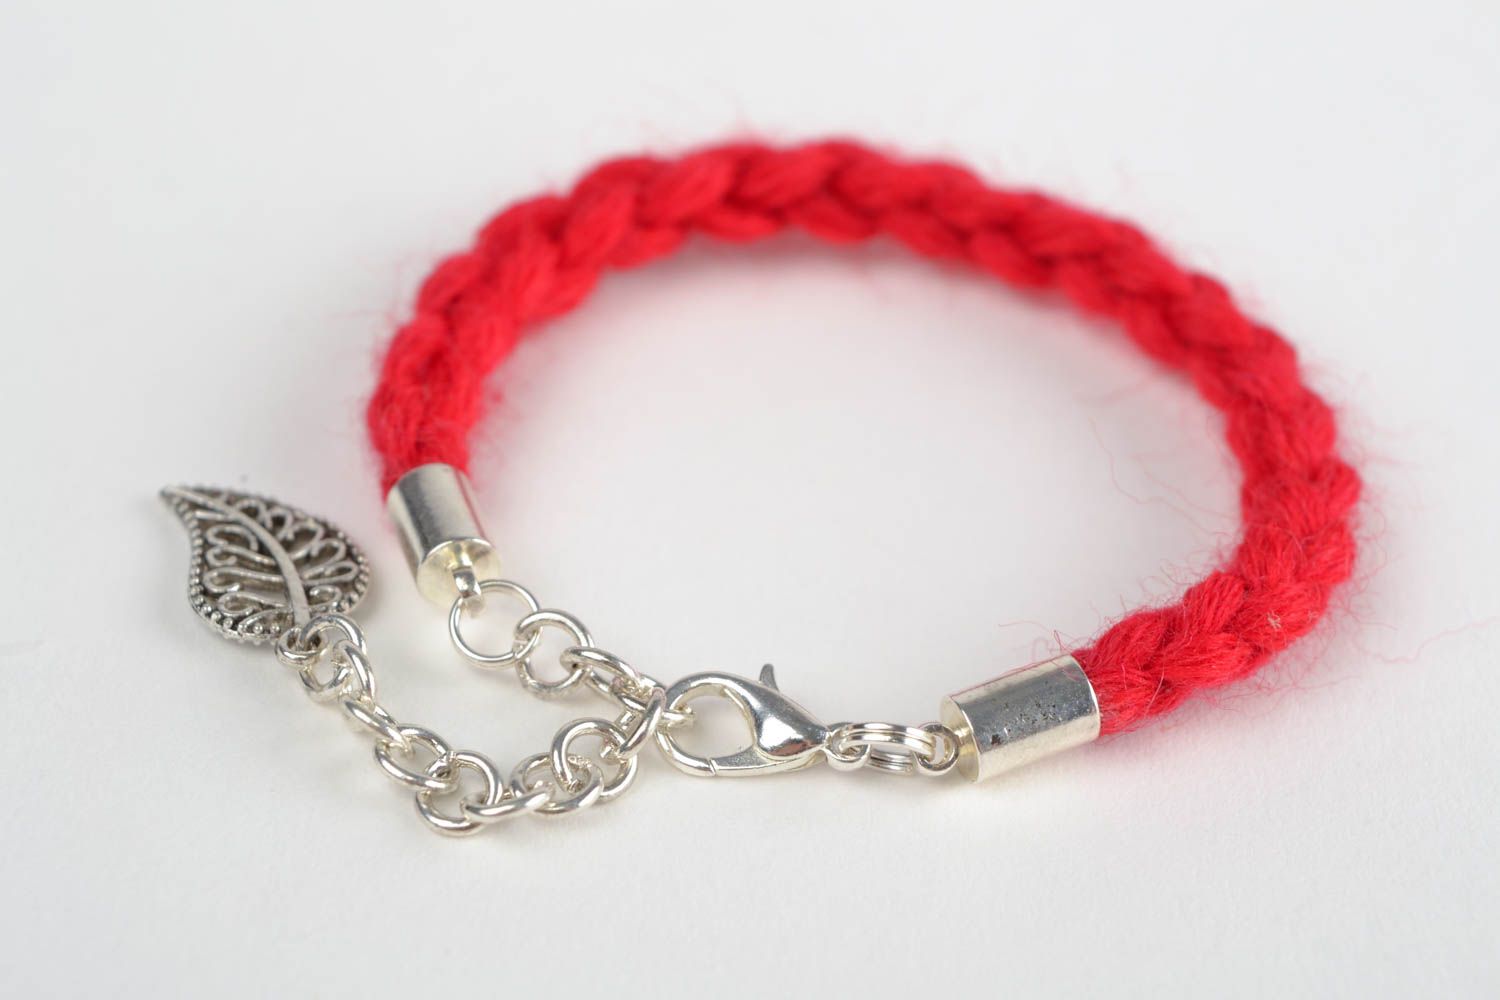 Handmade thin  wrist bracelet woven of red woolen threads with metal leaf charm  photo 4